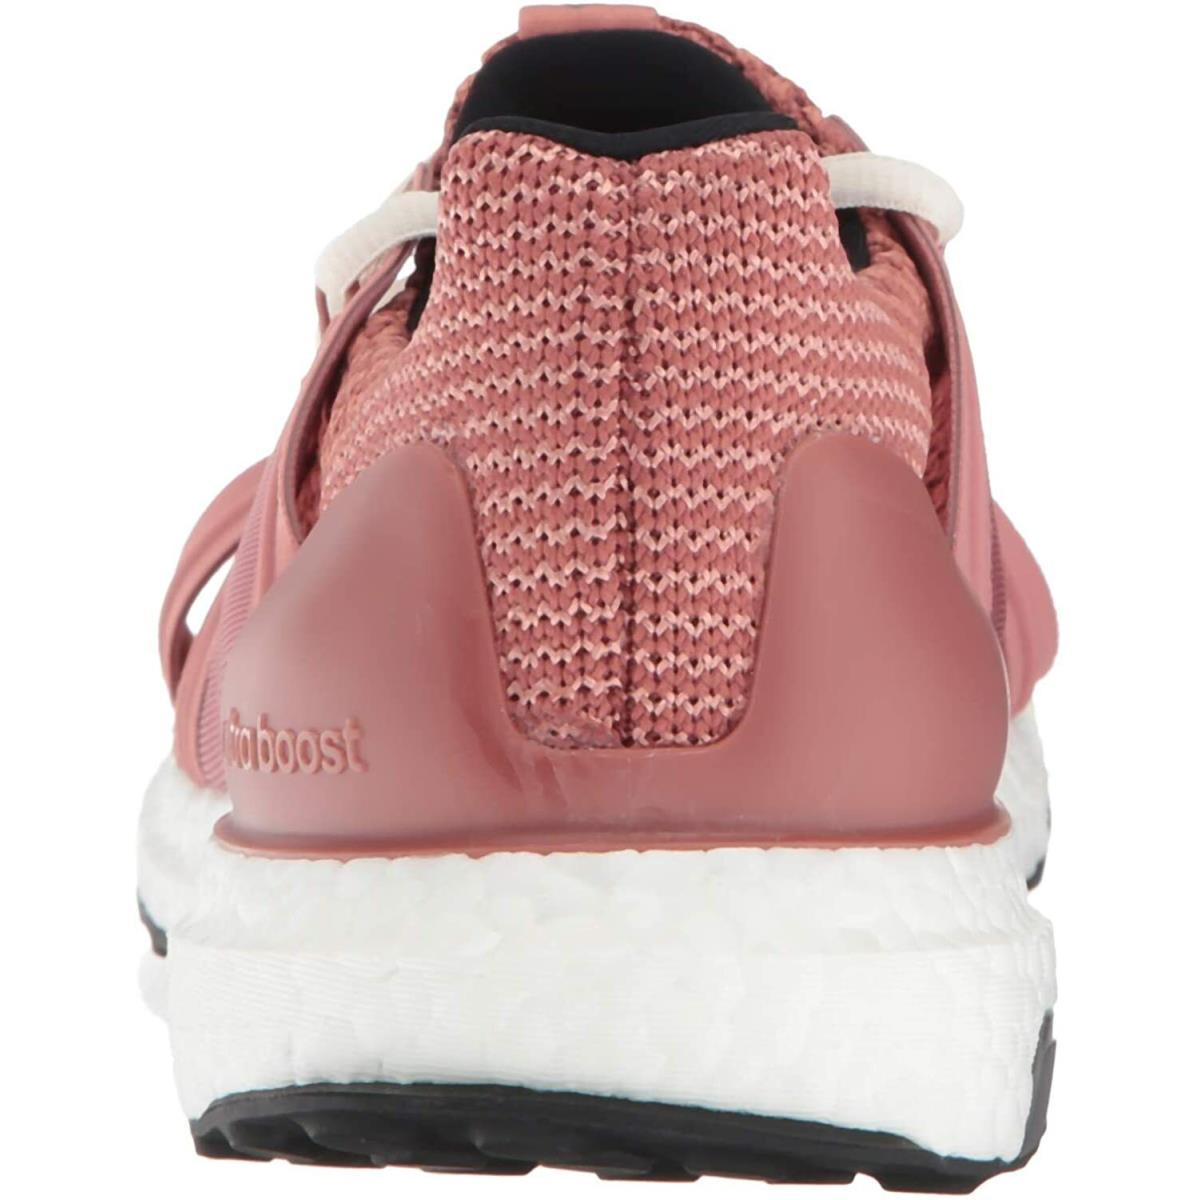 Adidas shoes Ultraboost - Raw Pink/Coffee Rose/Black 3